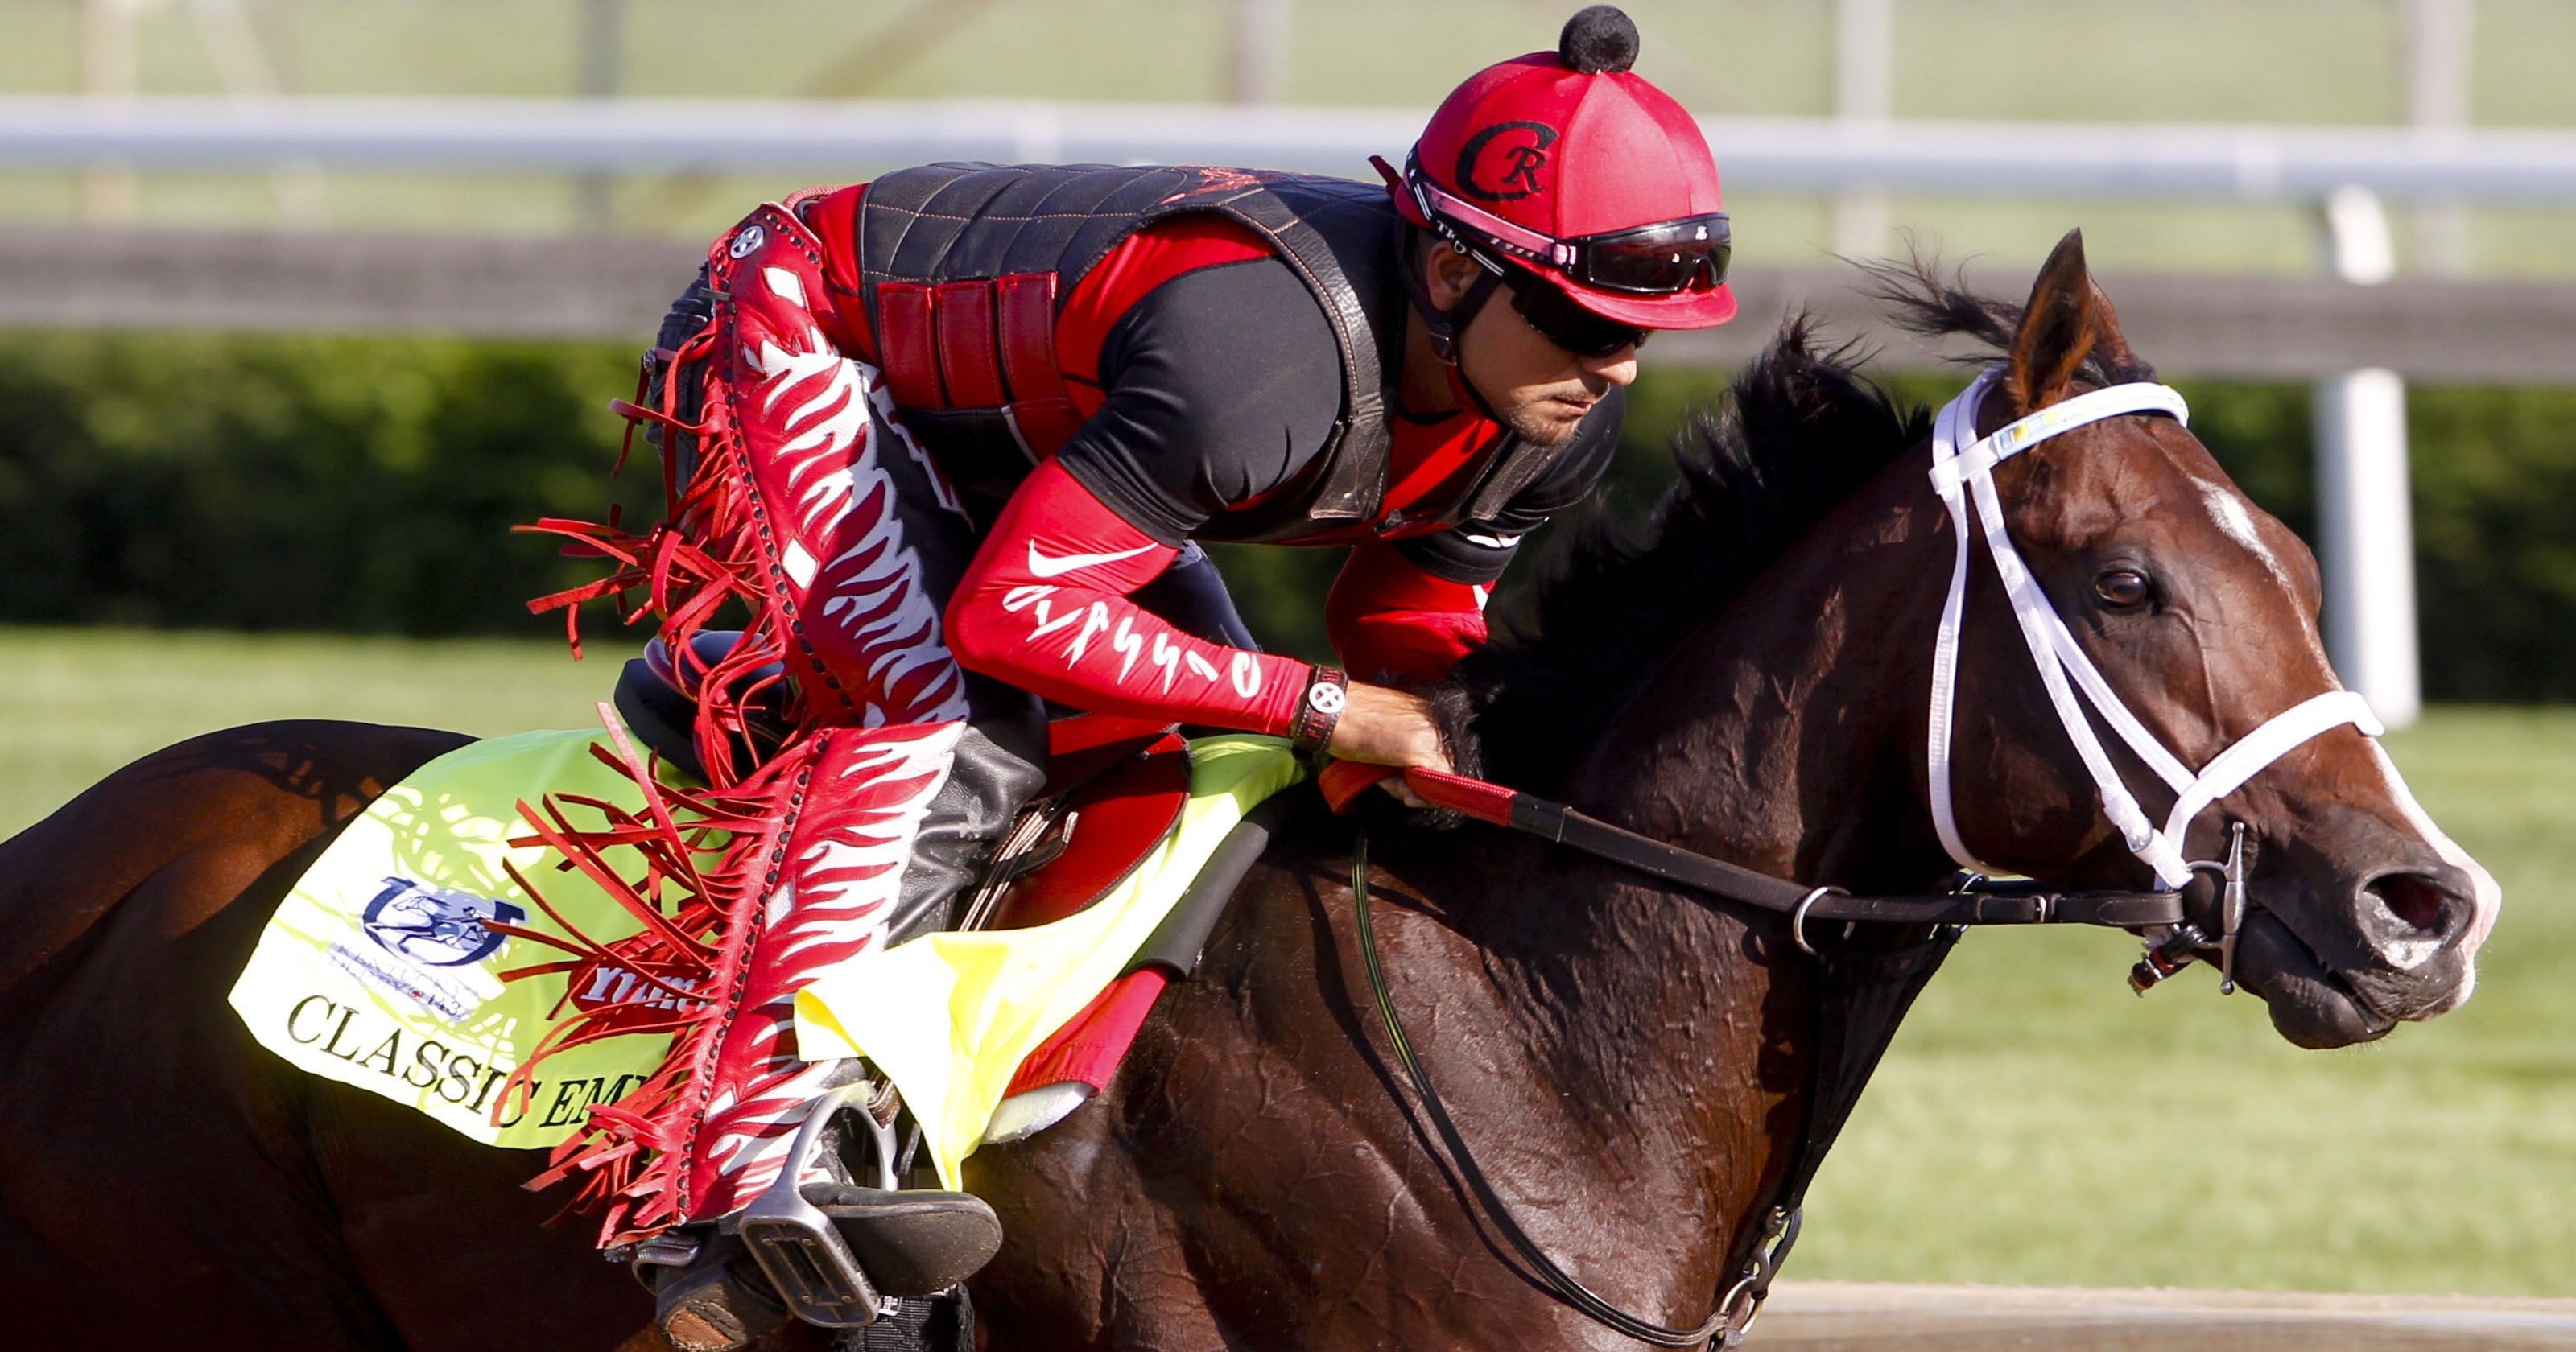 Kentucky Derby: Facts on 20 horses in field led by favorite Classic Empire